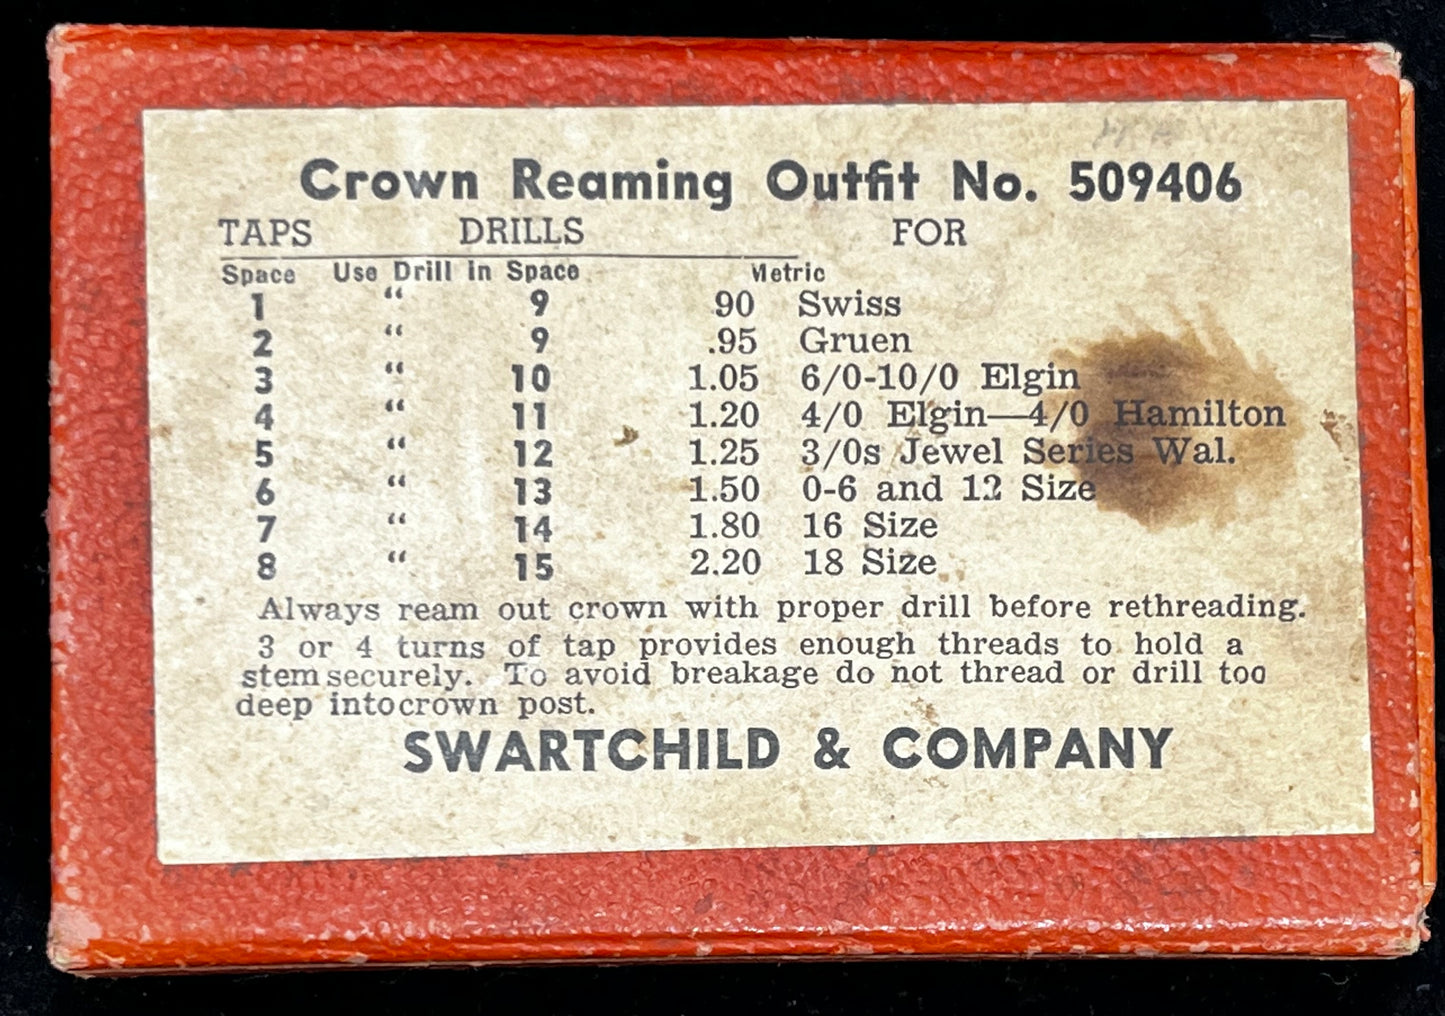 Swartchild & Company Crown Reaming Outfit No. 509406